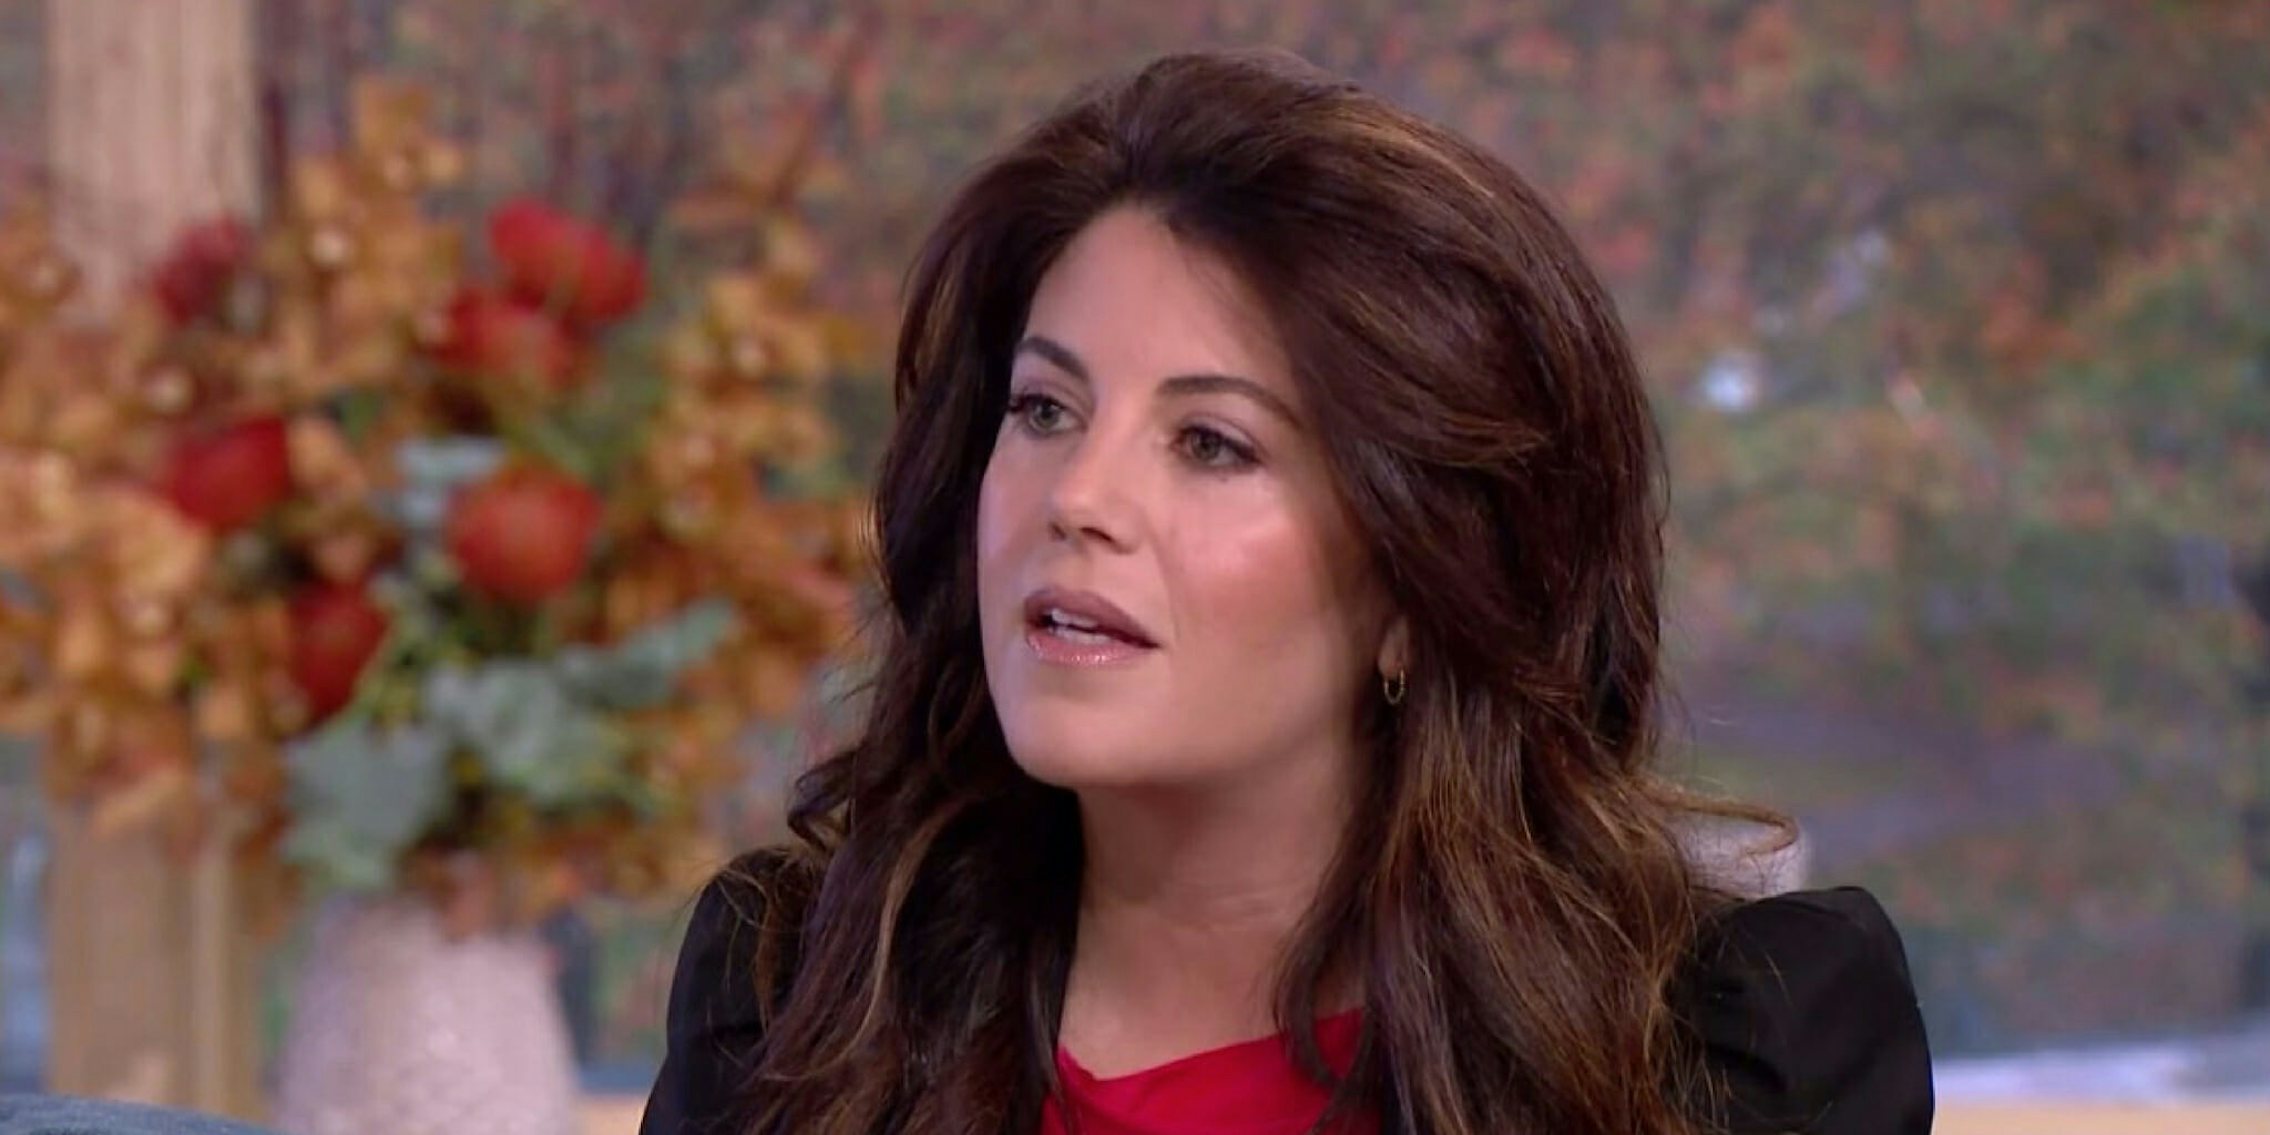 Town And Country Magazine Apologizes For Tossing Monica Lewinsky Off Guest List For Bill Clinton